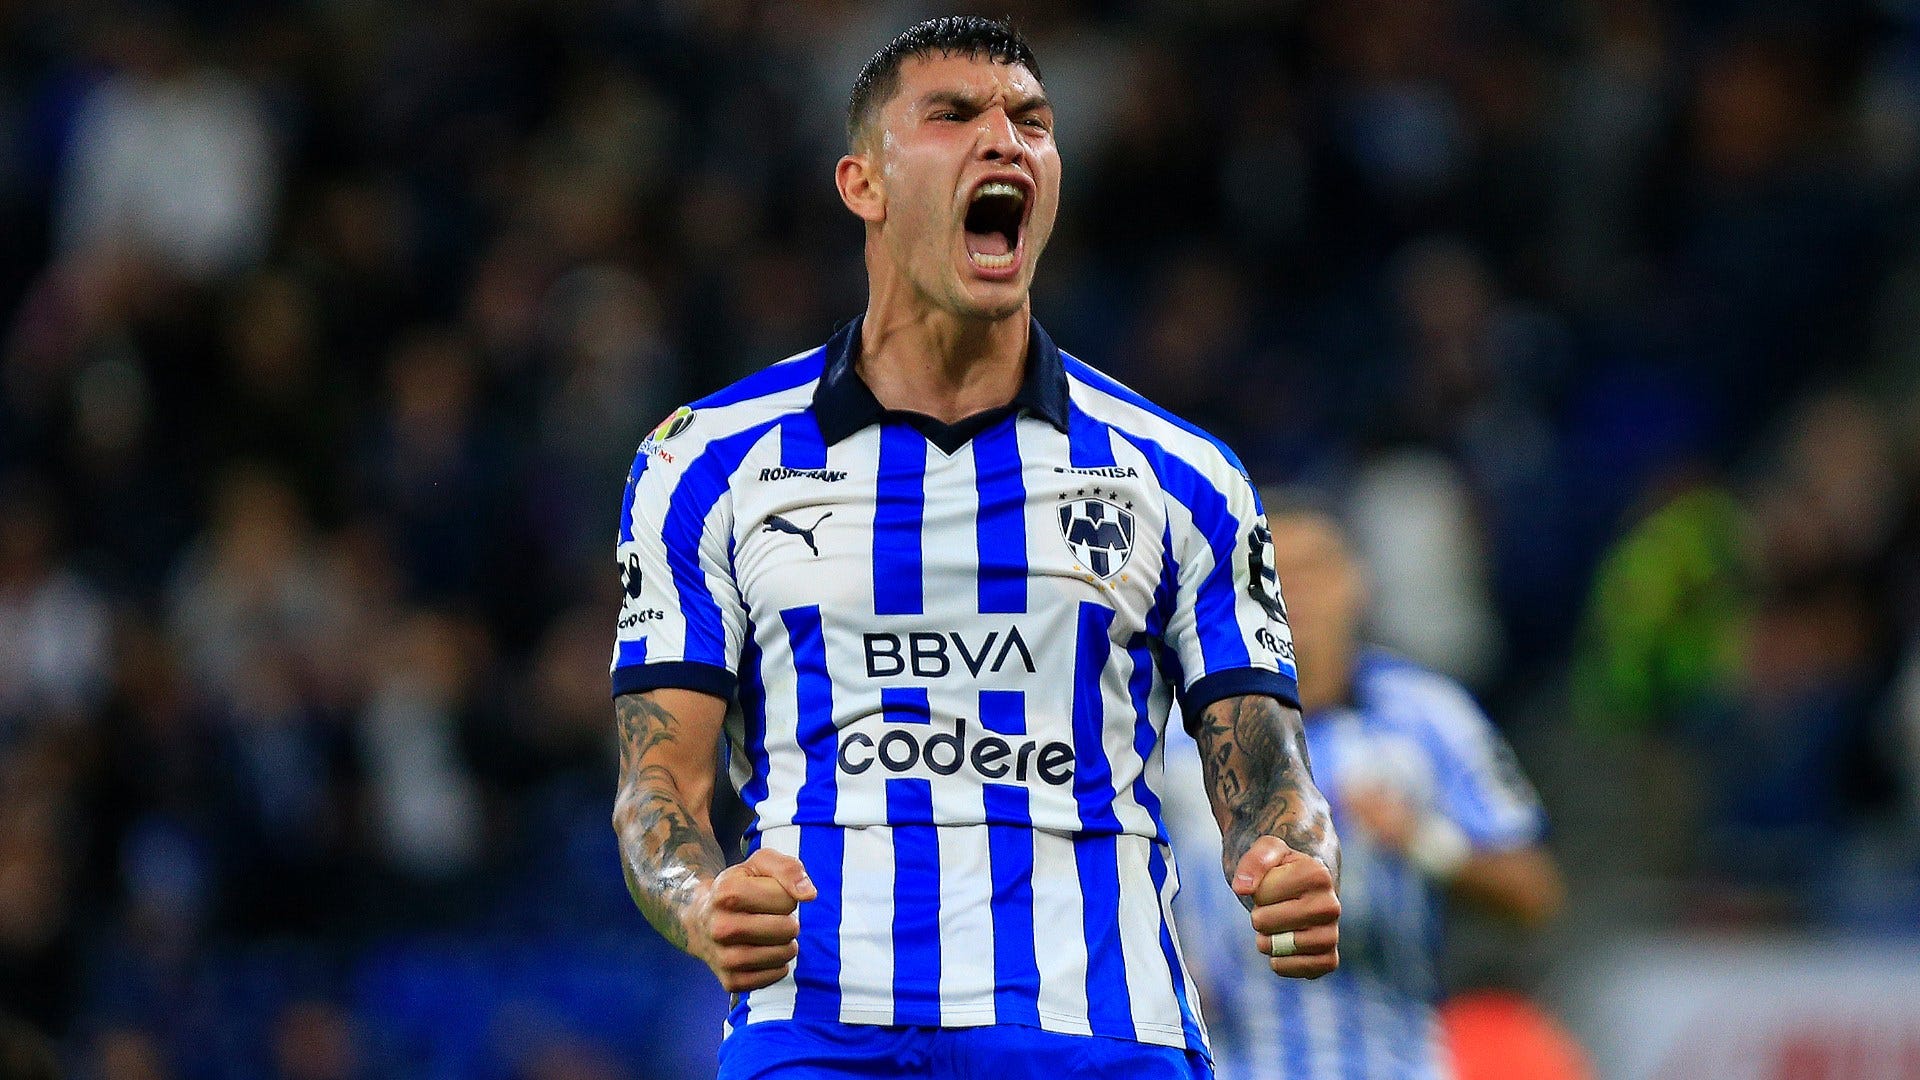 WATCH: Brandon Vazquez is on fire! USMNT striker scores incredible looping header for Monterrey before sliding home a second goal in 3-1 Liga MX victory over San Luis